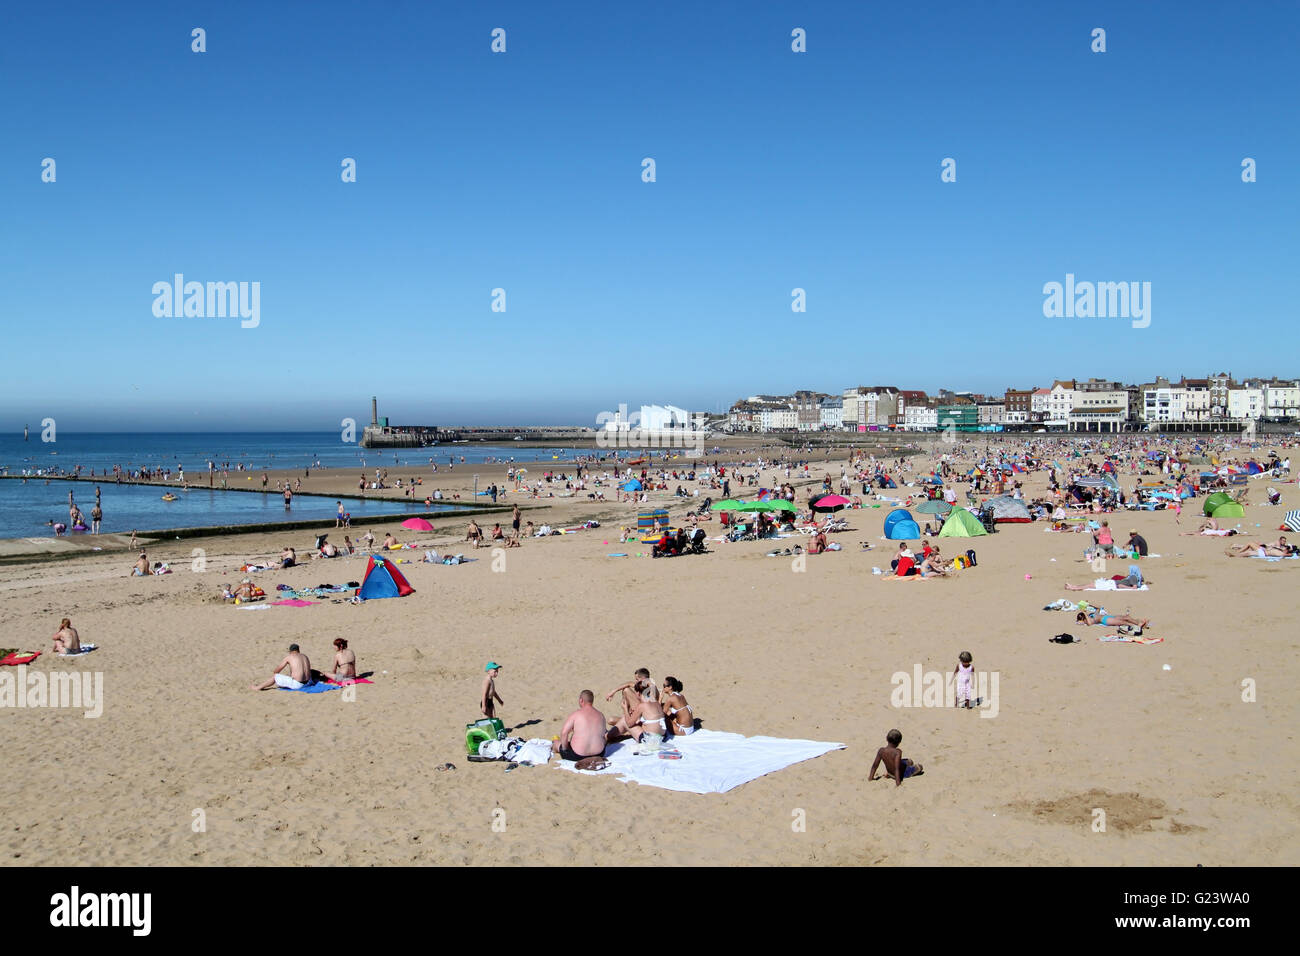 People enjoying the sunshine on a sunny day at Margate beach in East Sussex, England Stock Photo